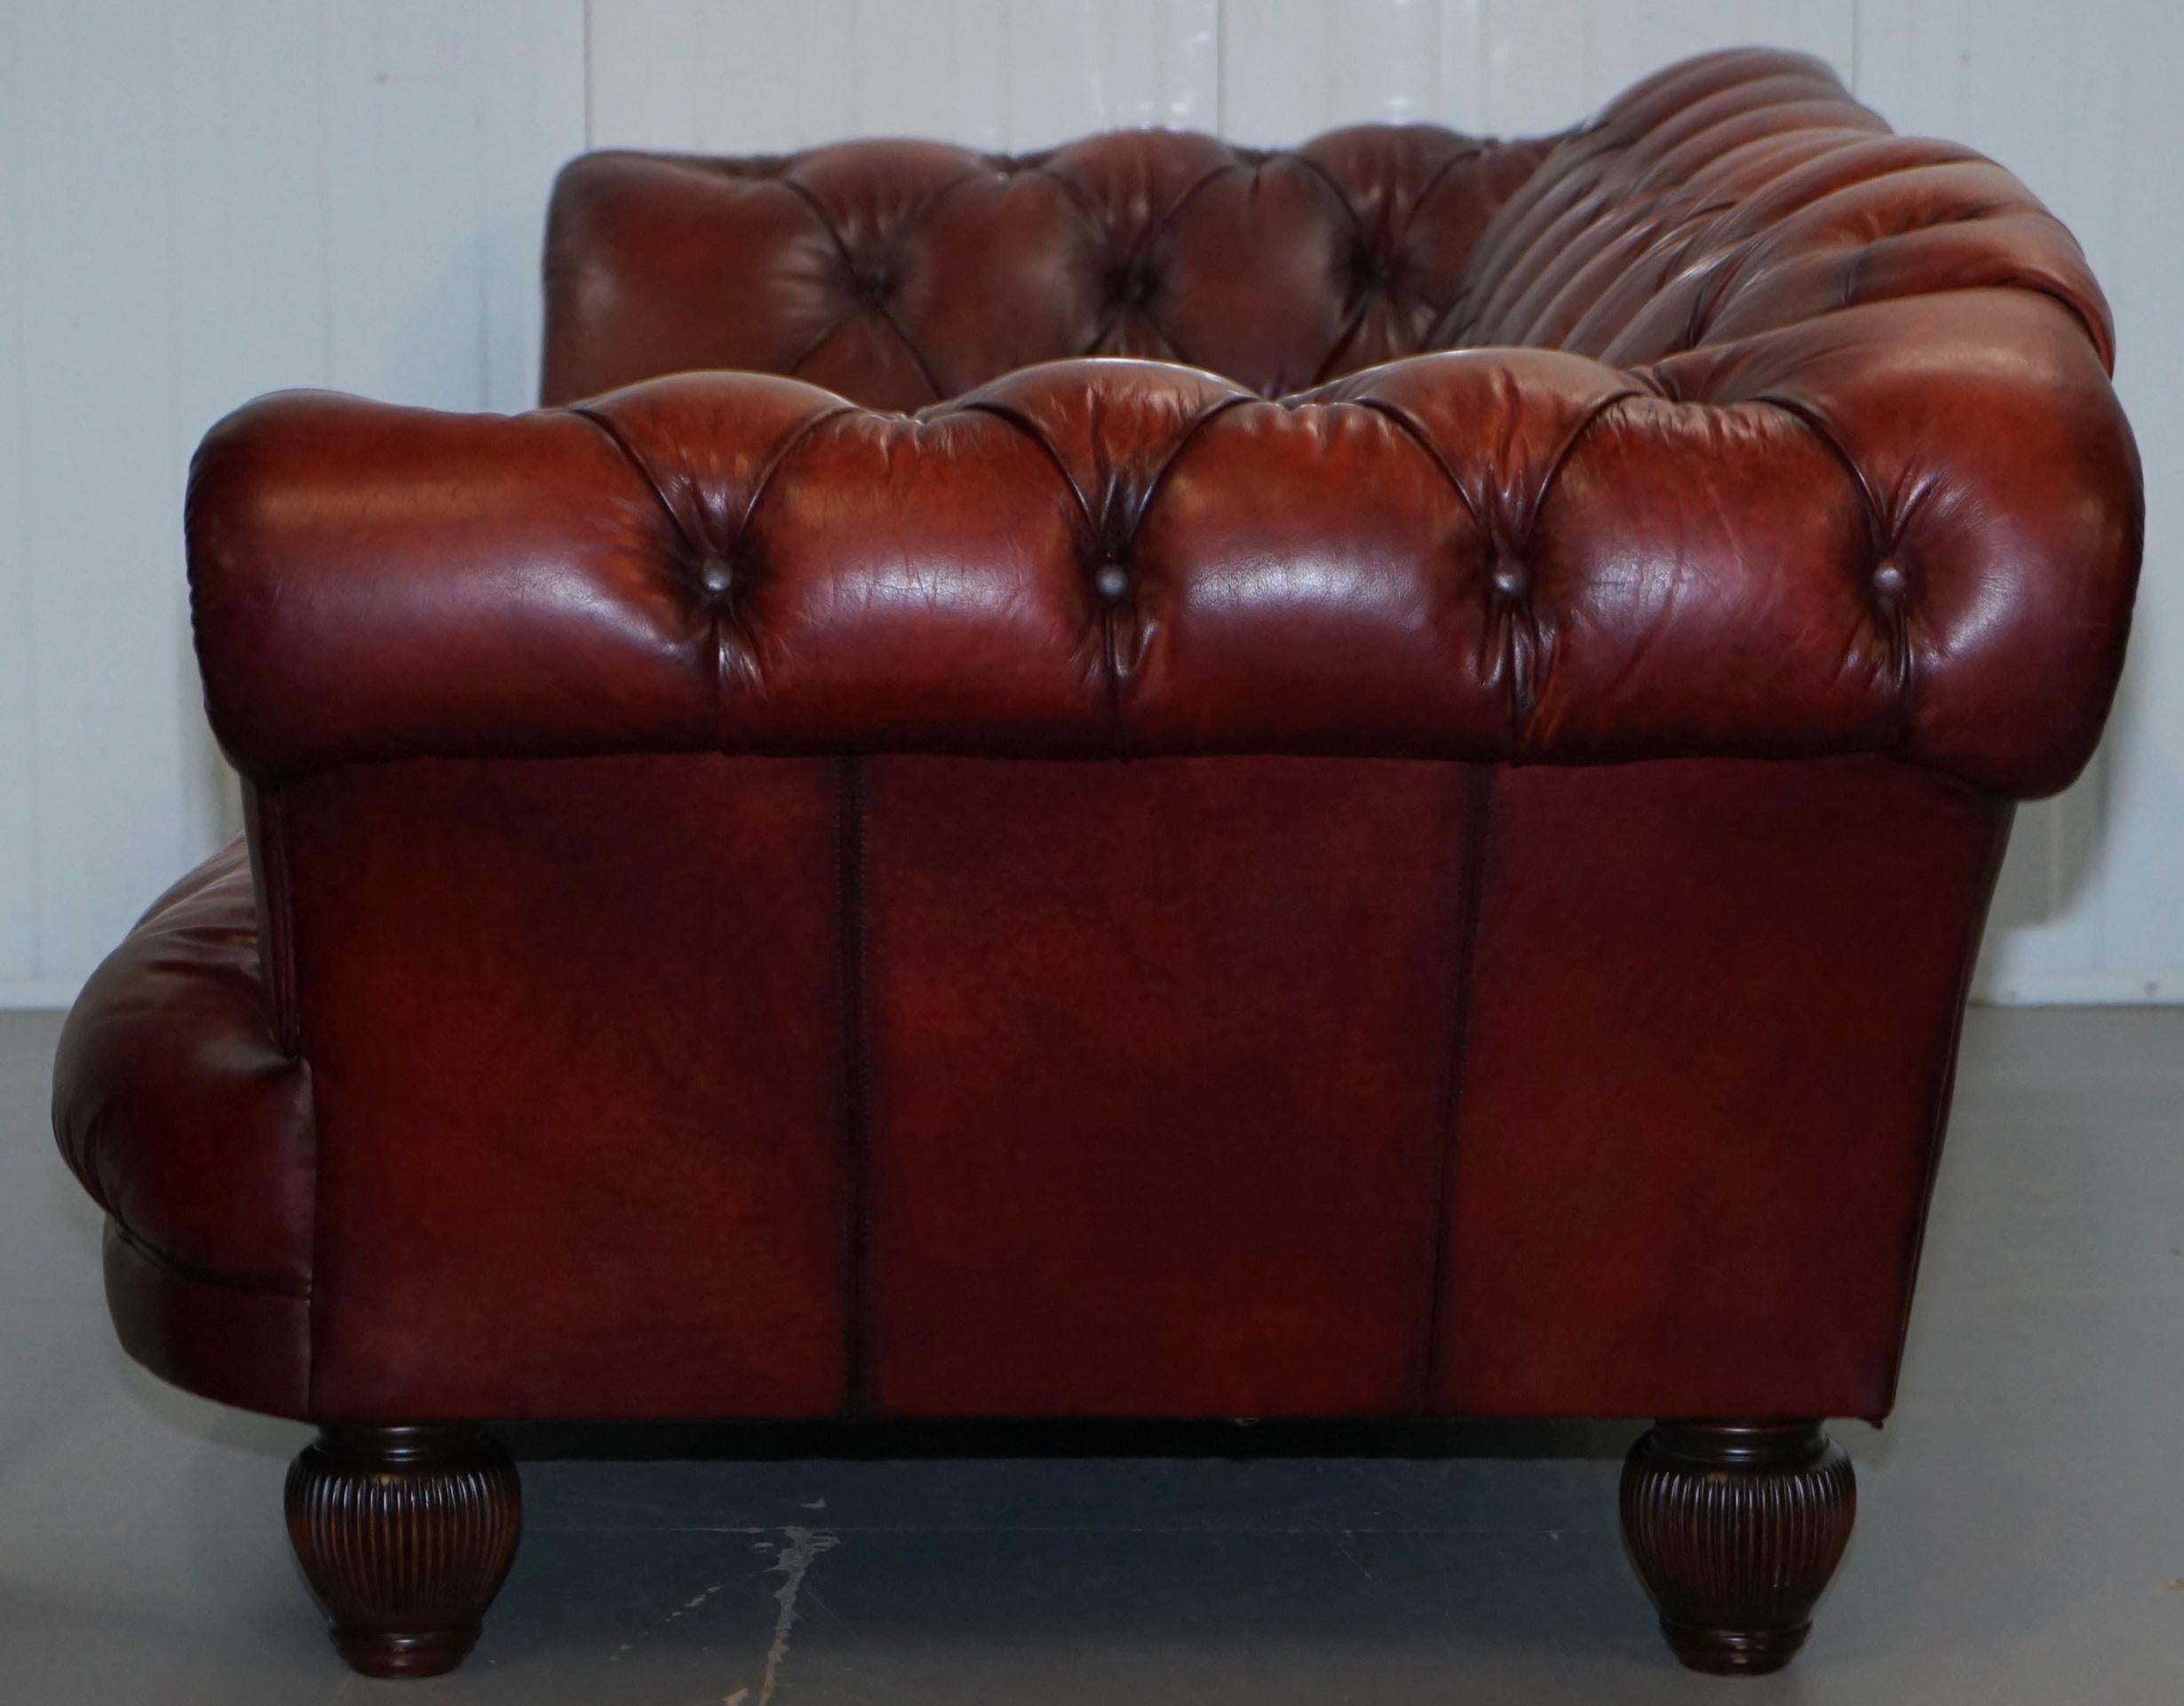 Tetrad Oskar Chesterfield Vintage Brown Leather Sofa Part of a Suite 9